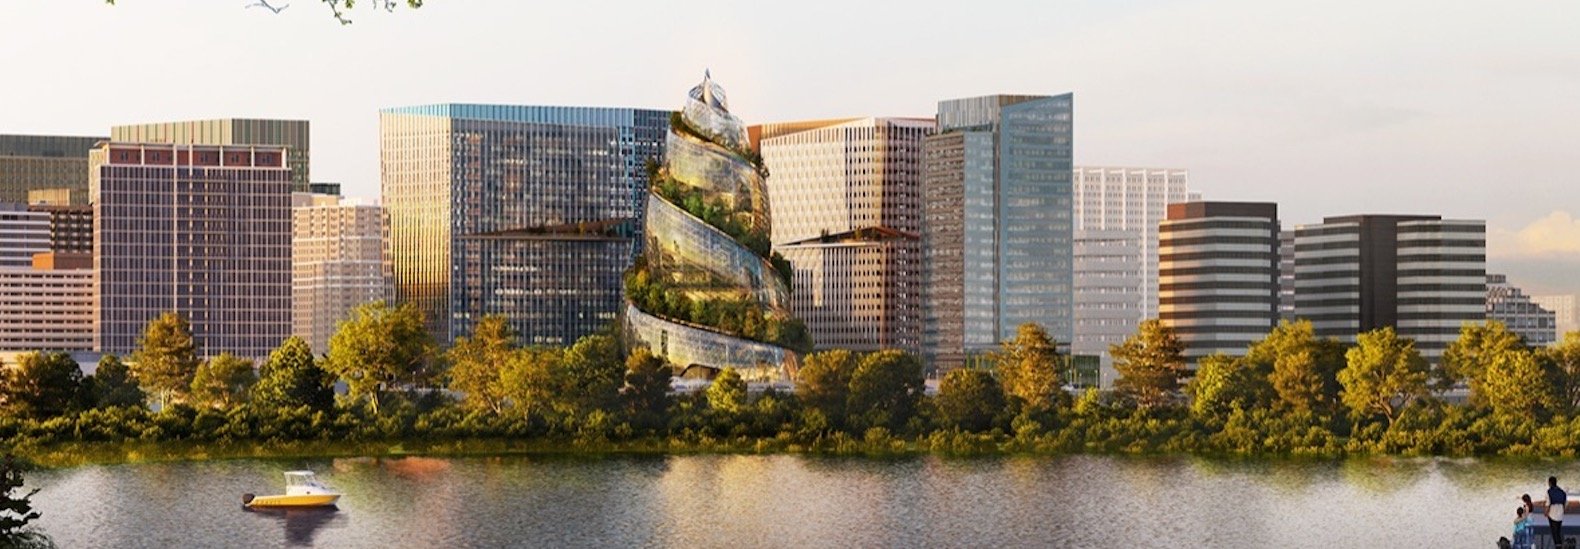 Amazon unveils spiraling, tree-covered skyscraper for Arlington HQ2